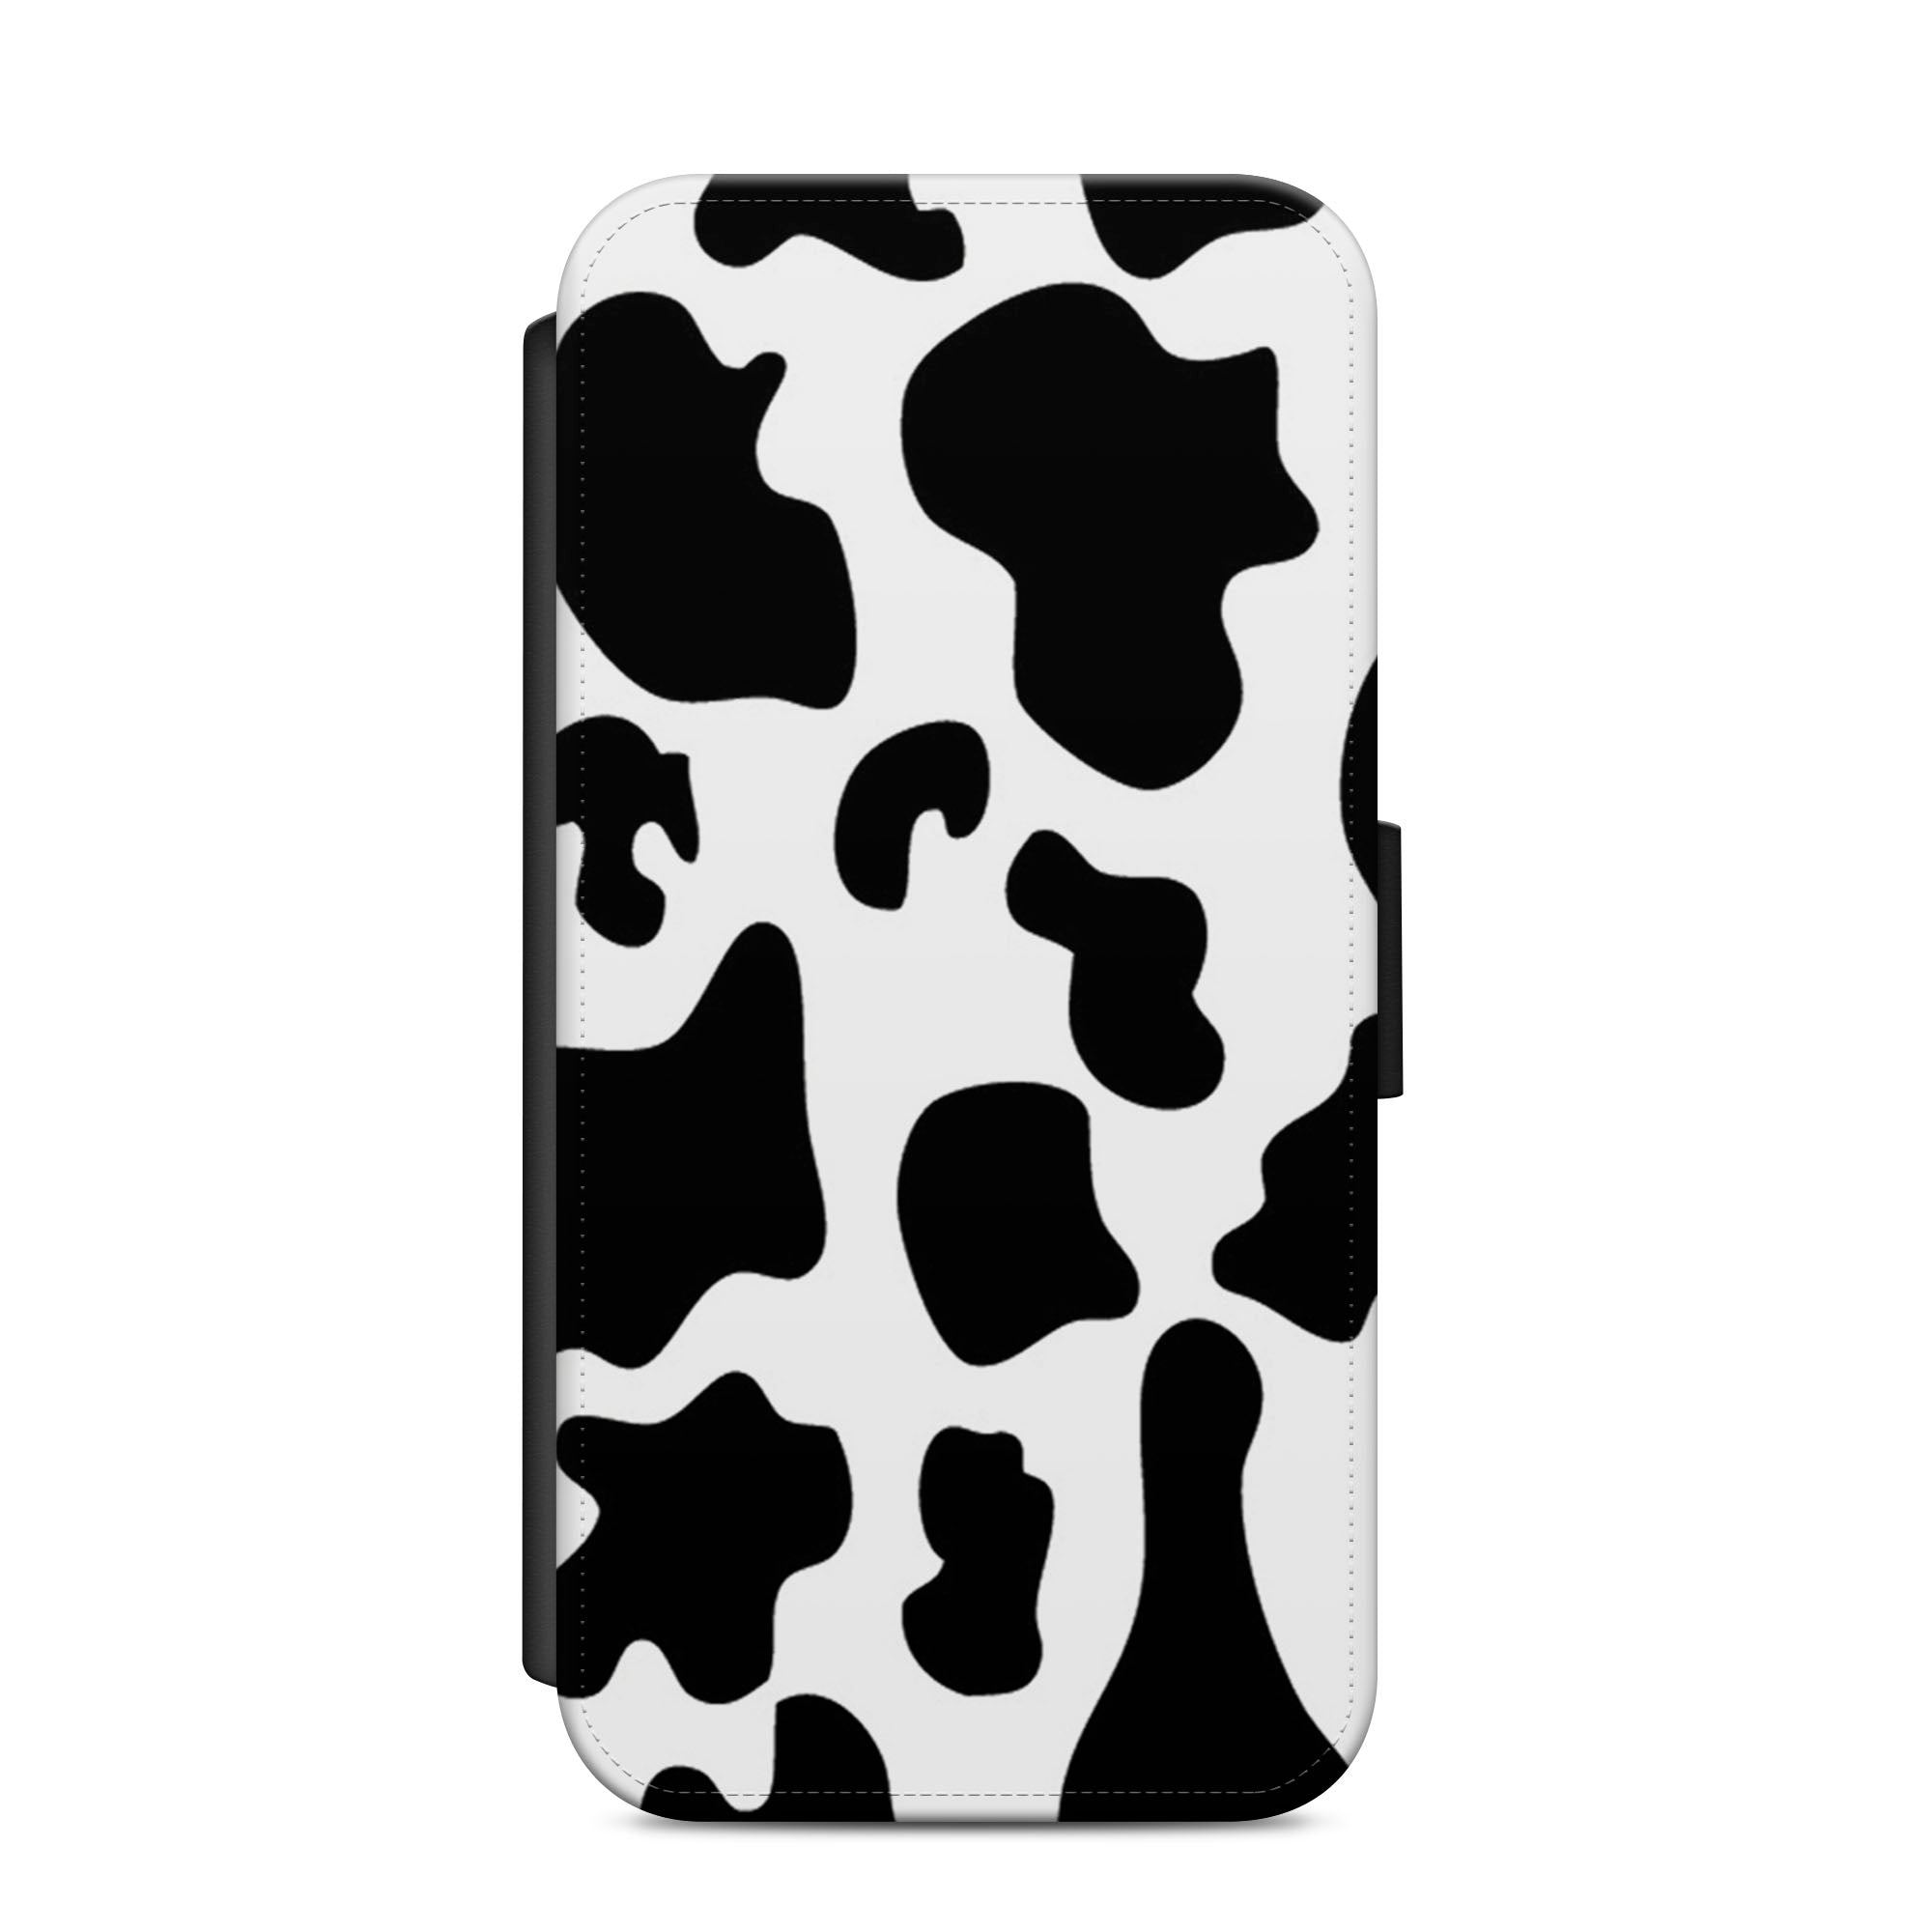 Cow Print Faux Leather Flip Case Wallet for iPhone / Samsung